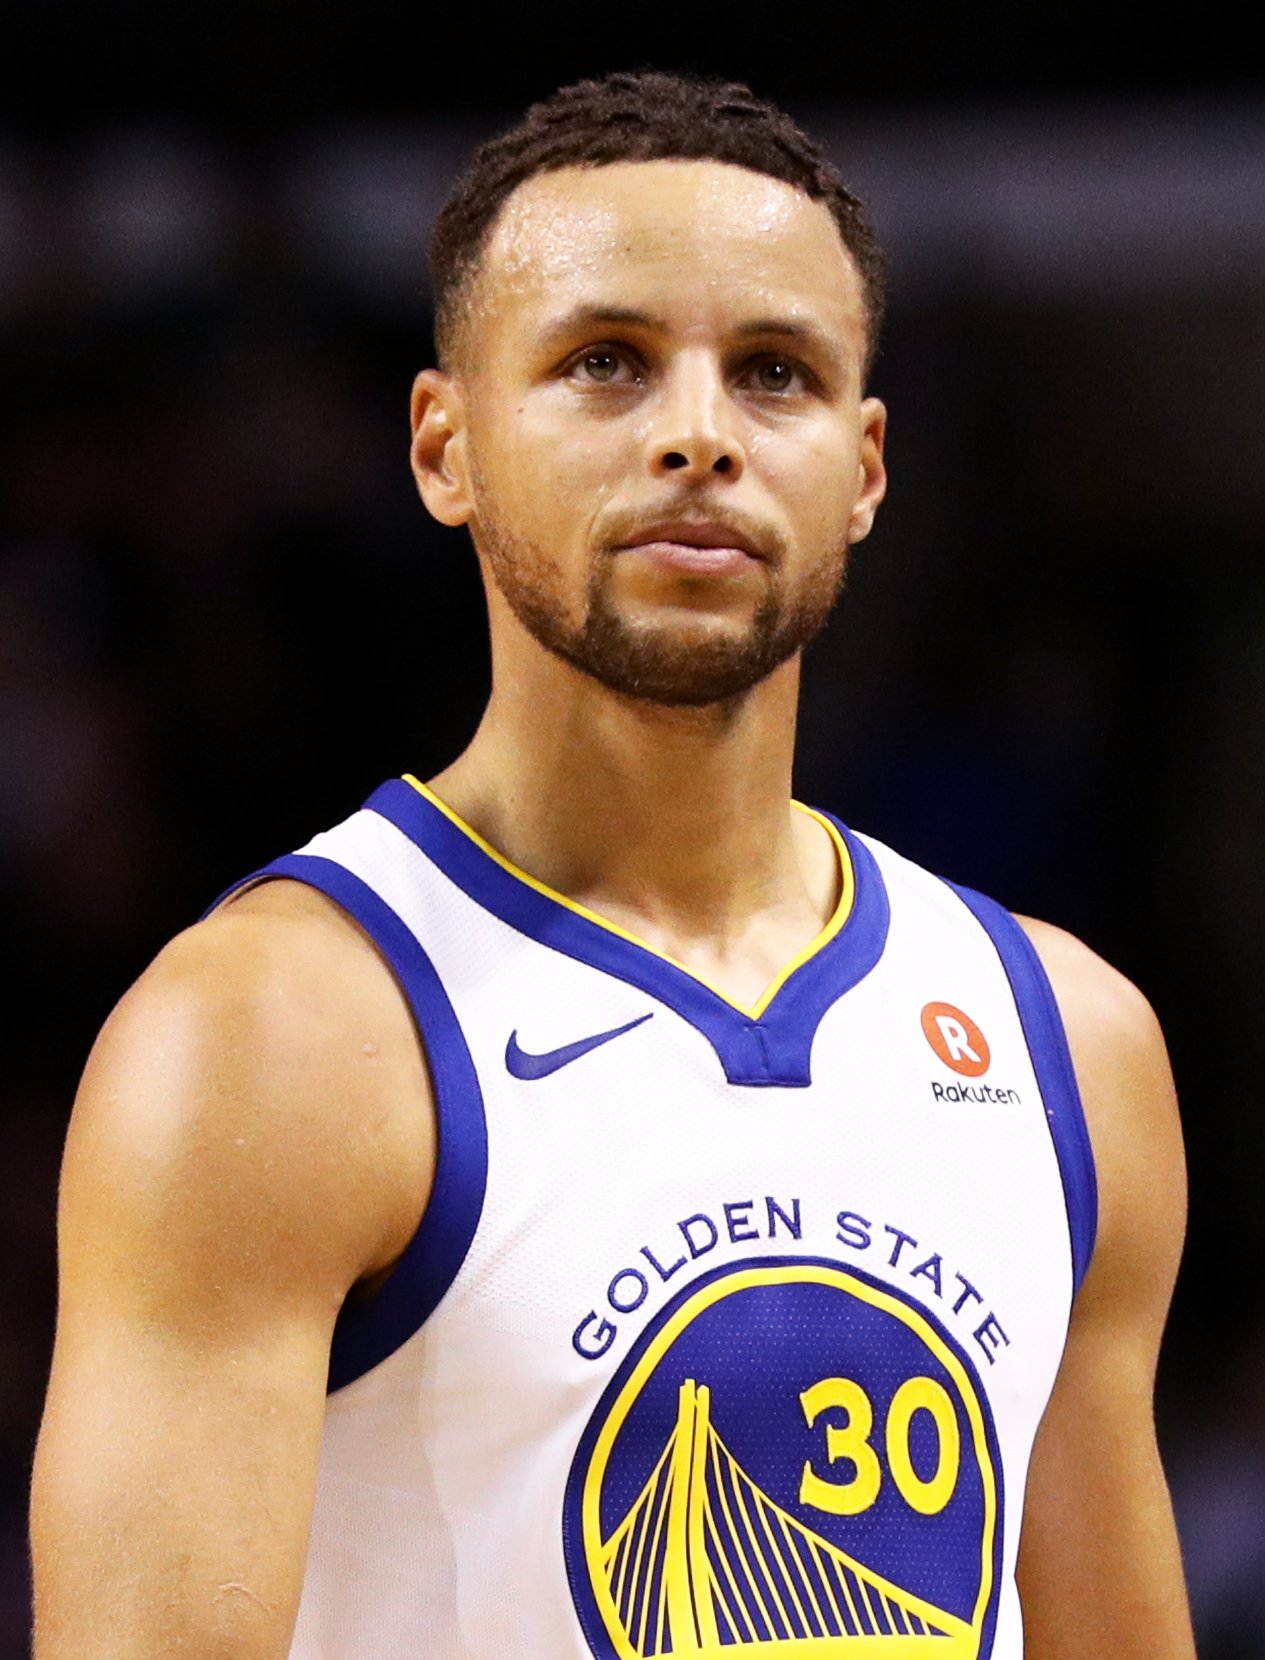 Stephen Curry #30 of the Golden State Warriors during a game against the Boston Celtics on Nov. 16, 2017 in Massachusetts | Photo: Getty Images